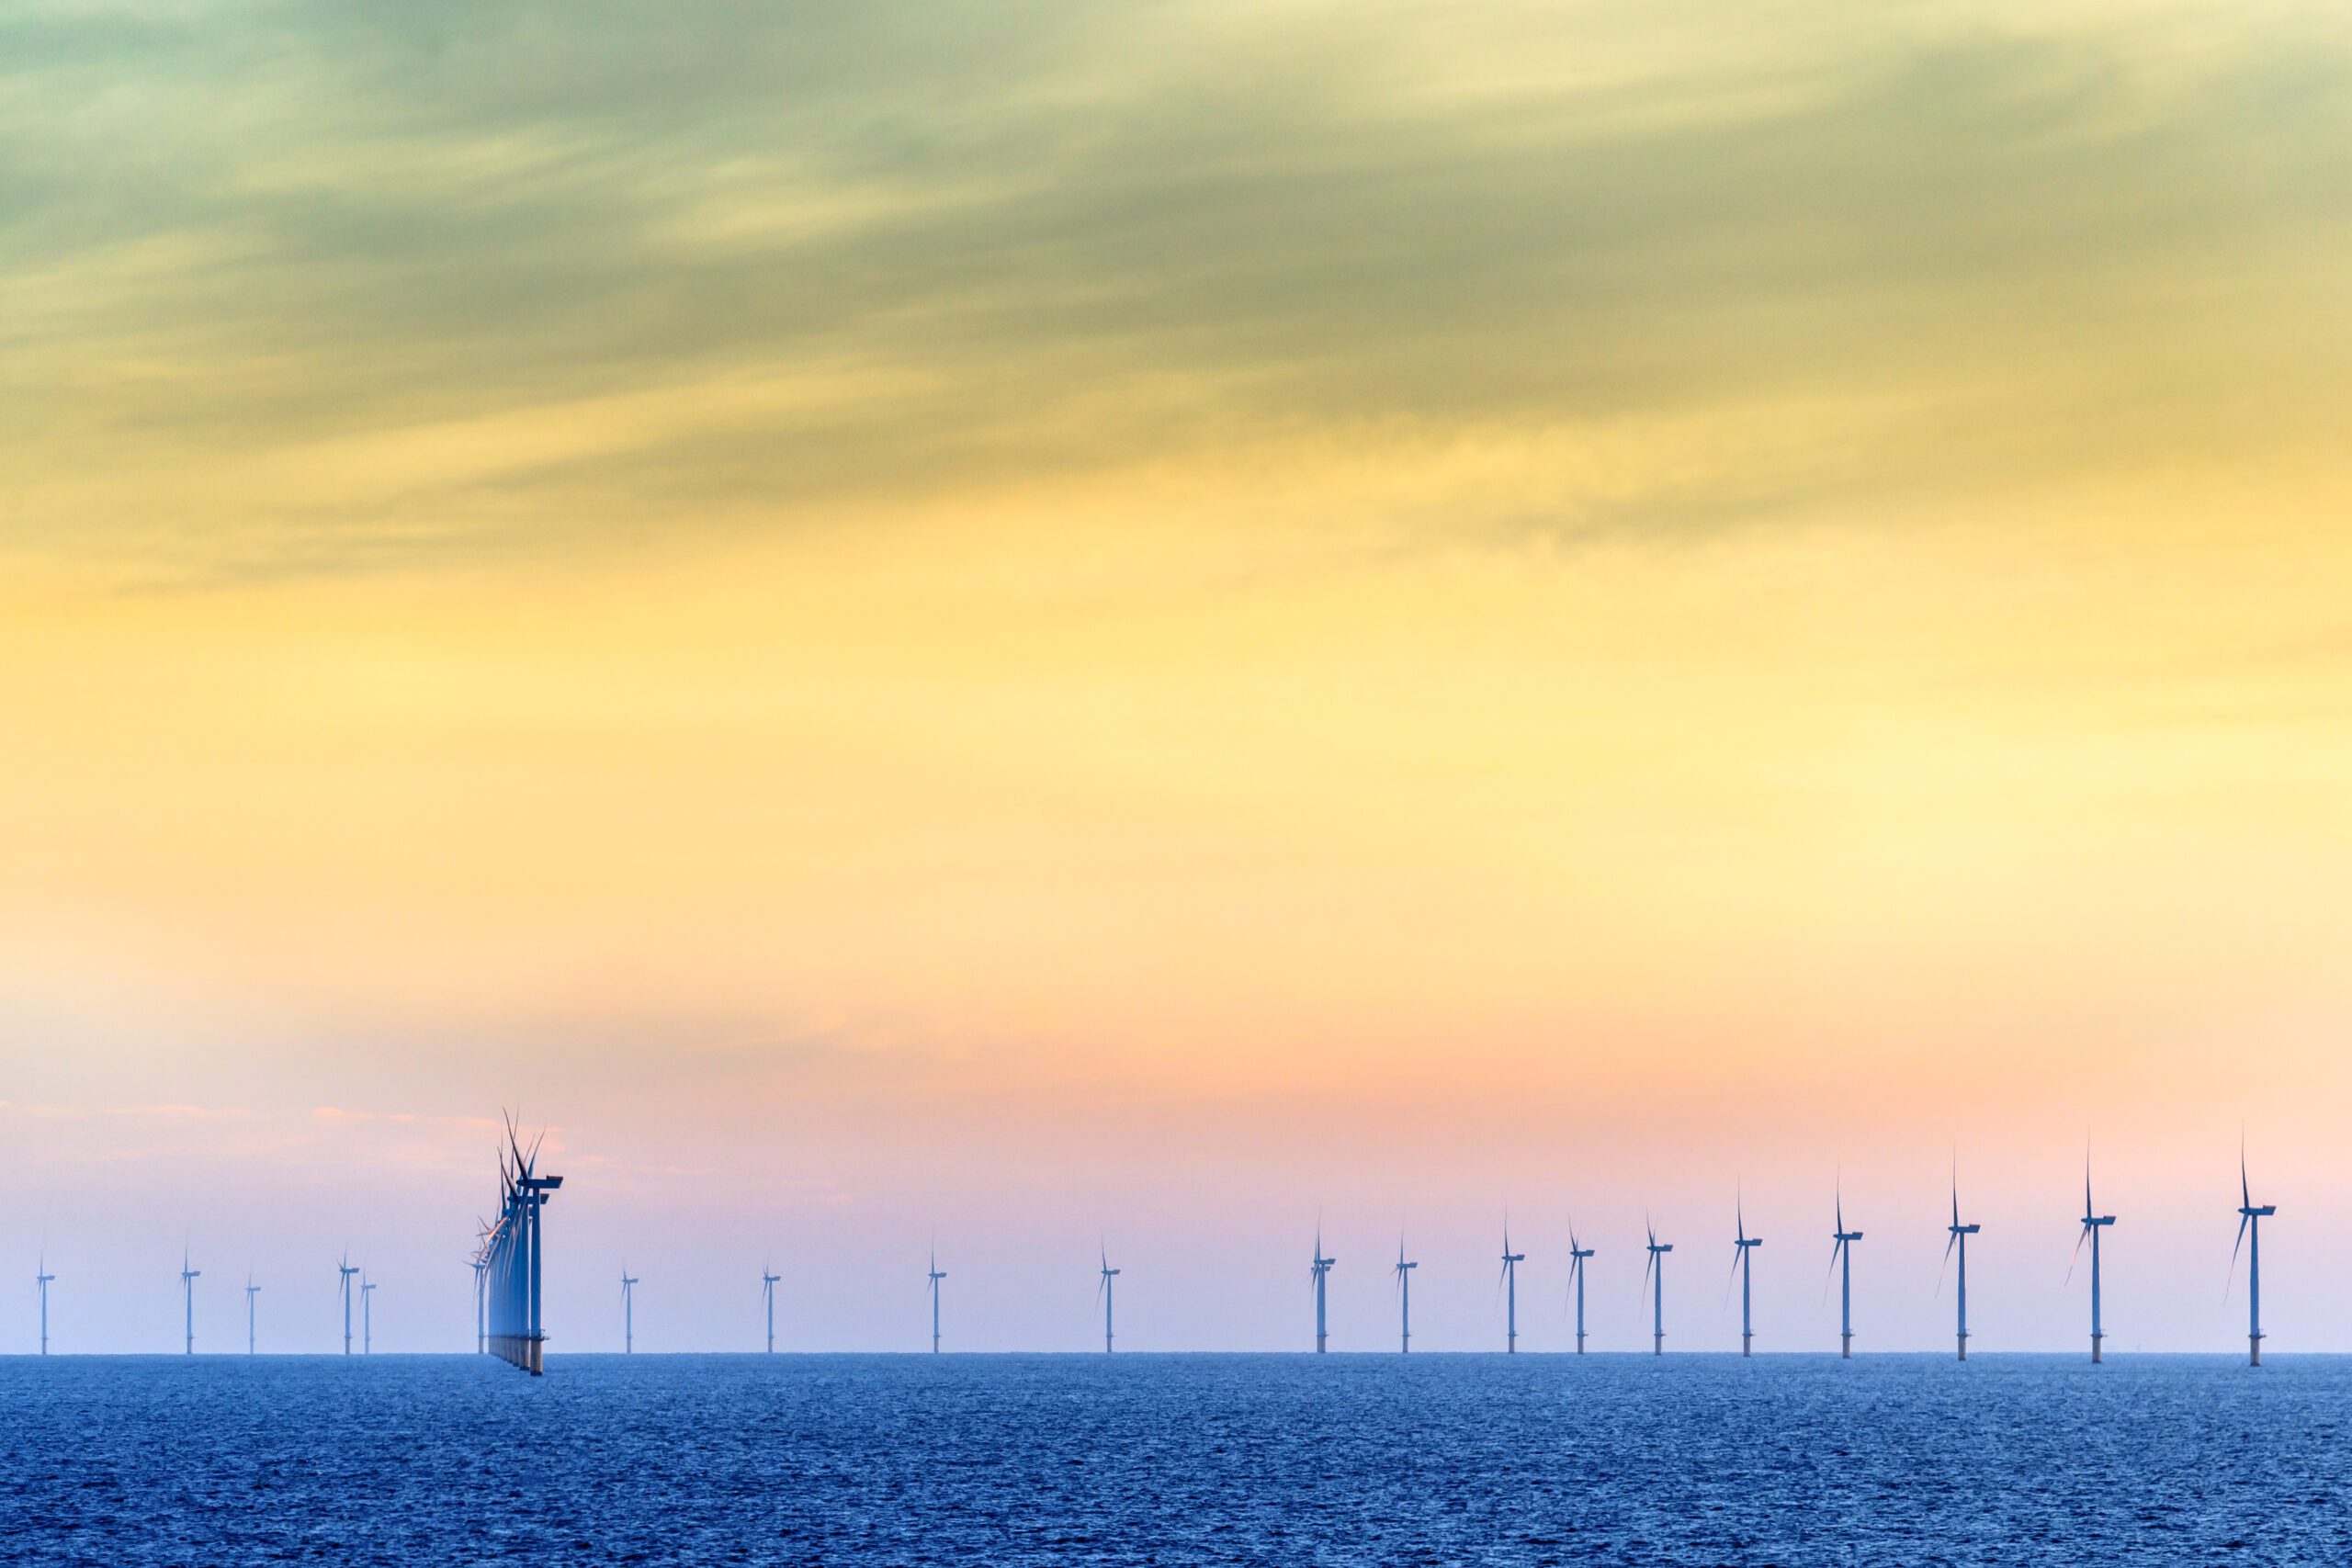 HORNSEA OFFSHORE WIND FARM, UK - 2016 JULY 15. Wind farm with the sun setting in the background.